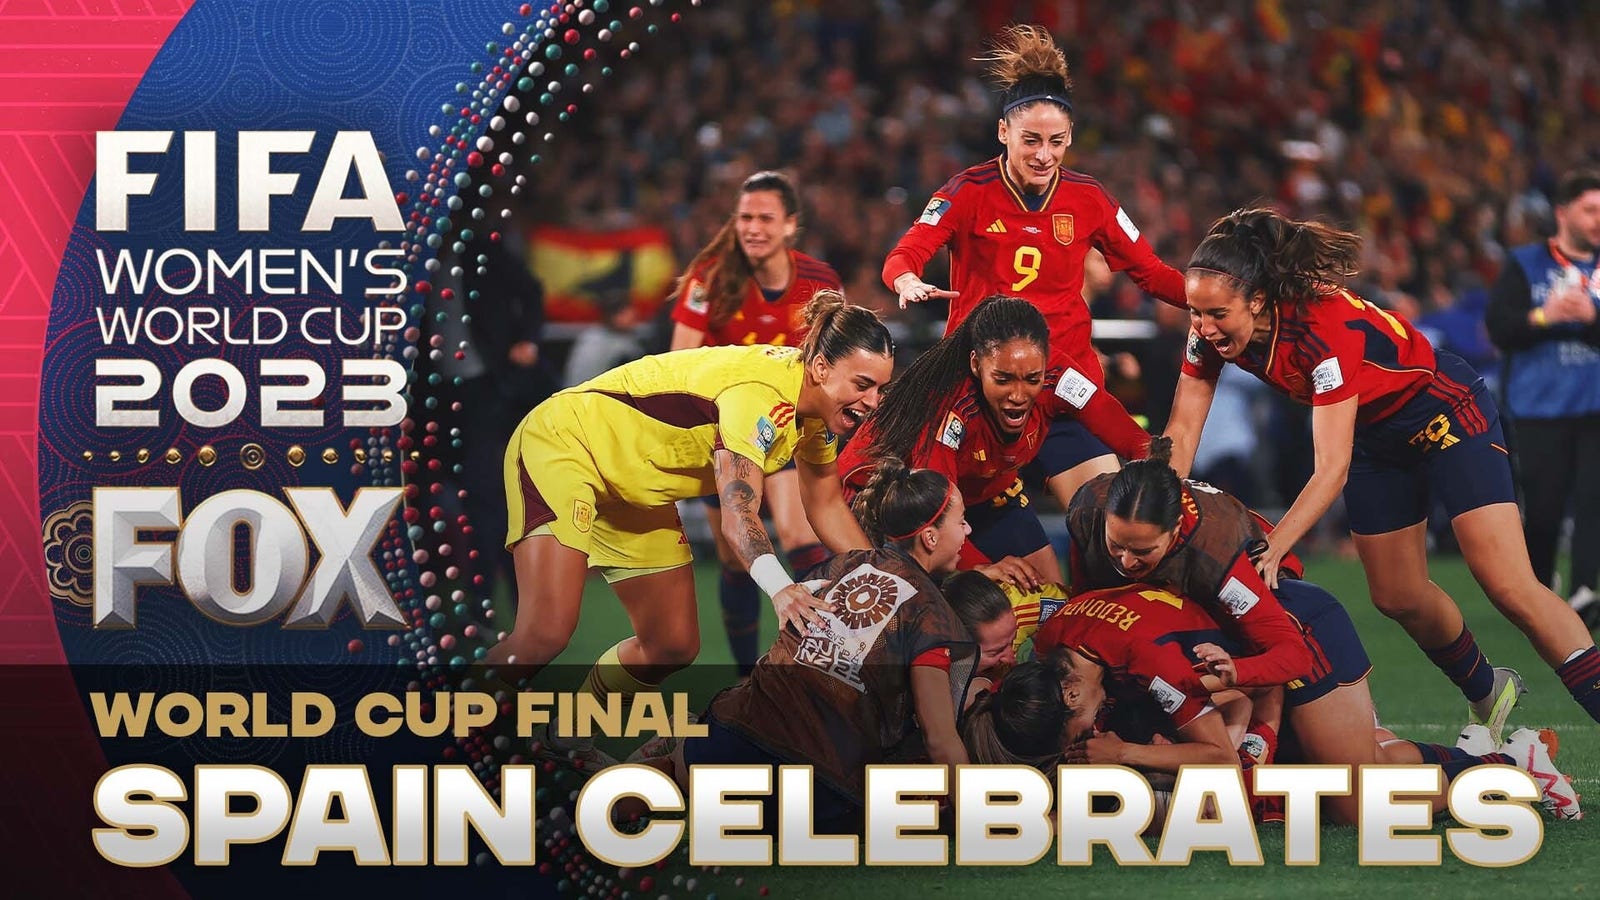 Spain celebrates after winning its first Women's World Cup